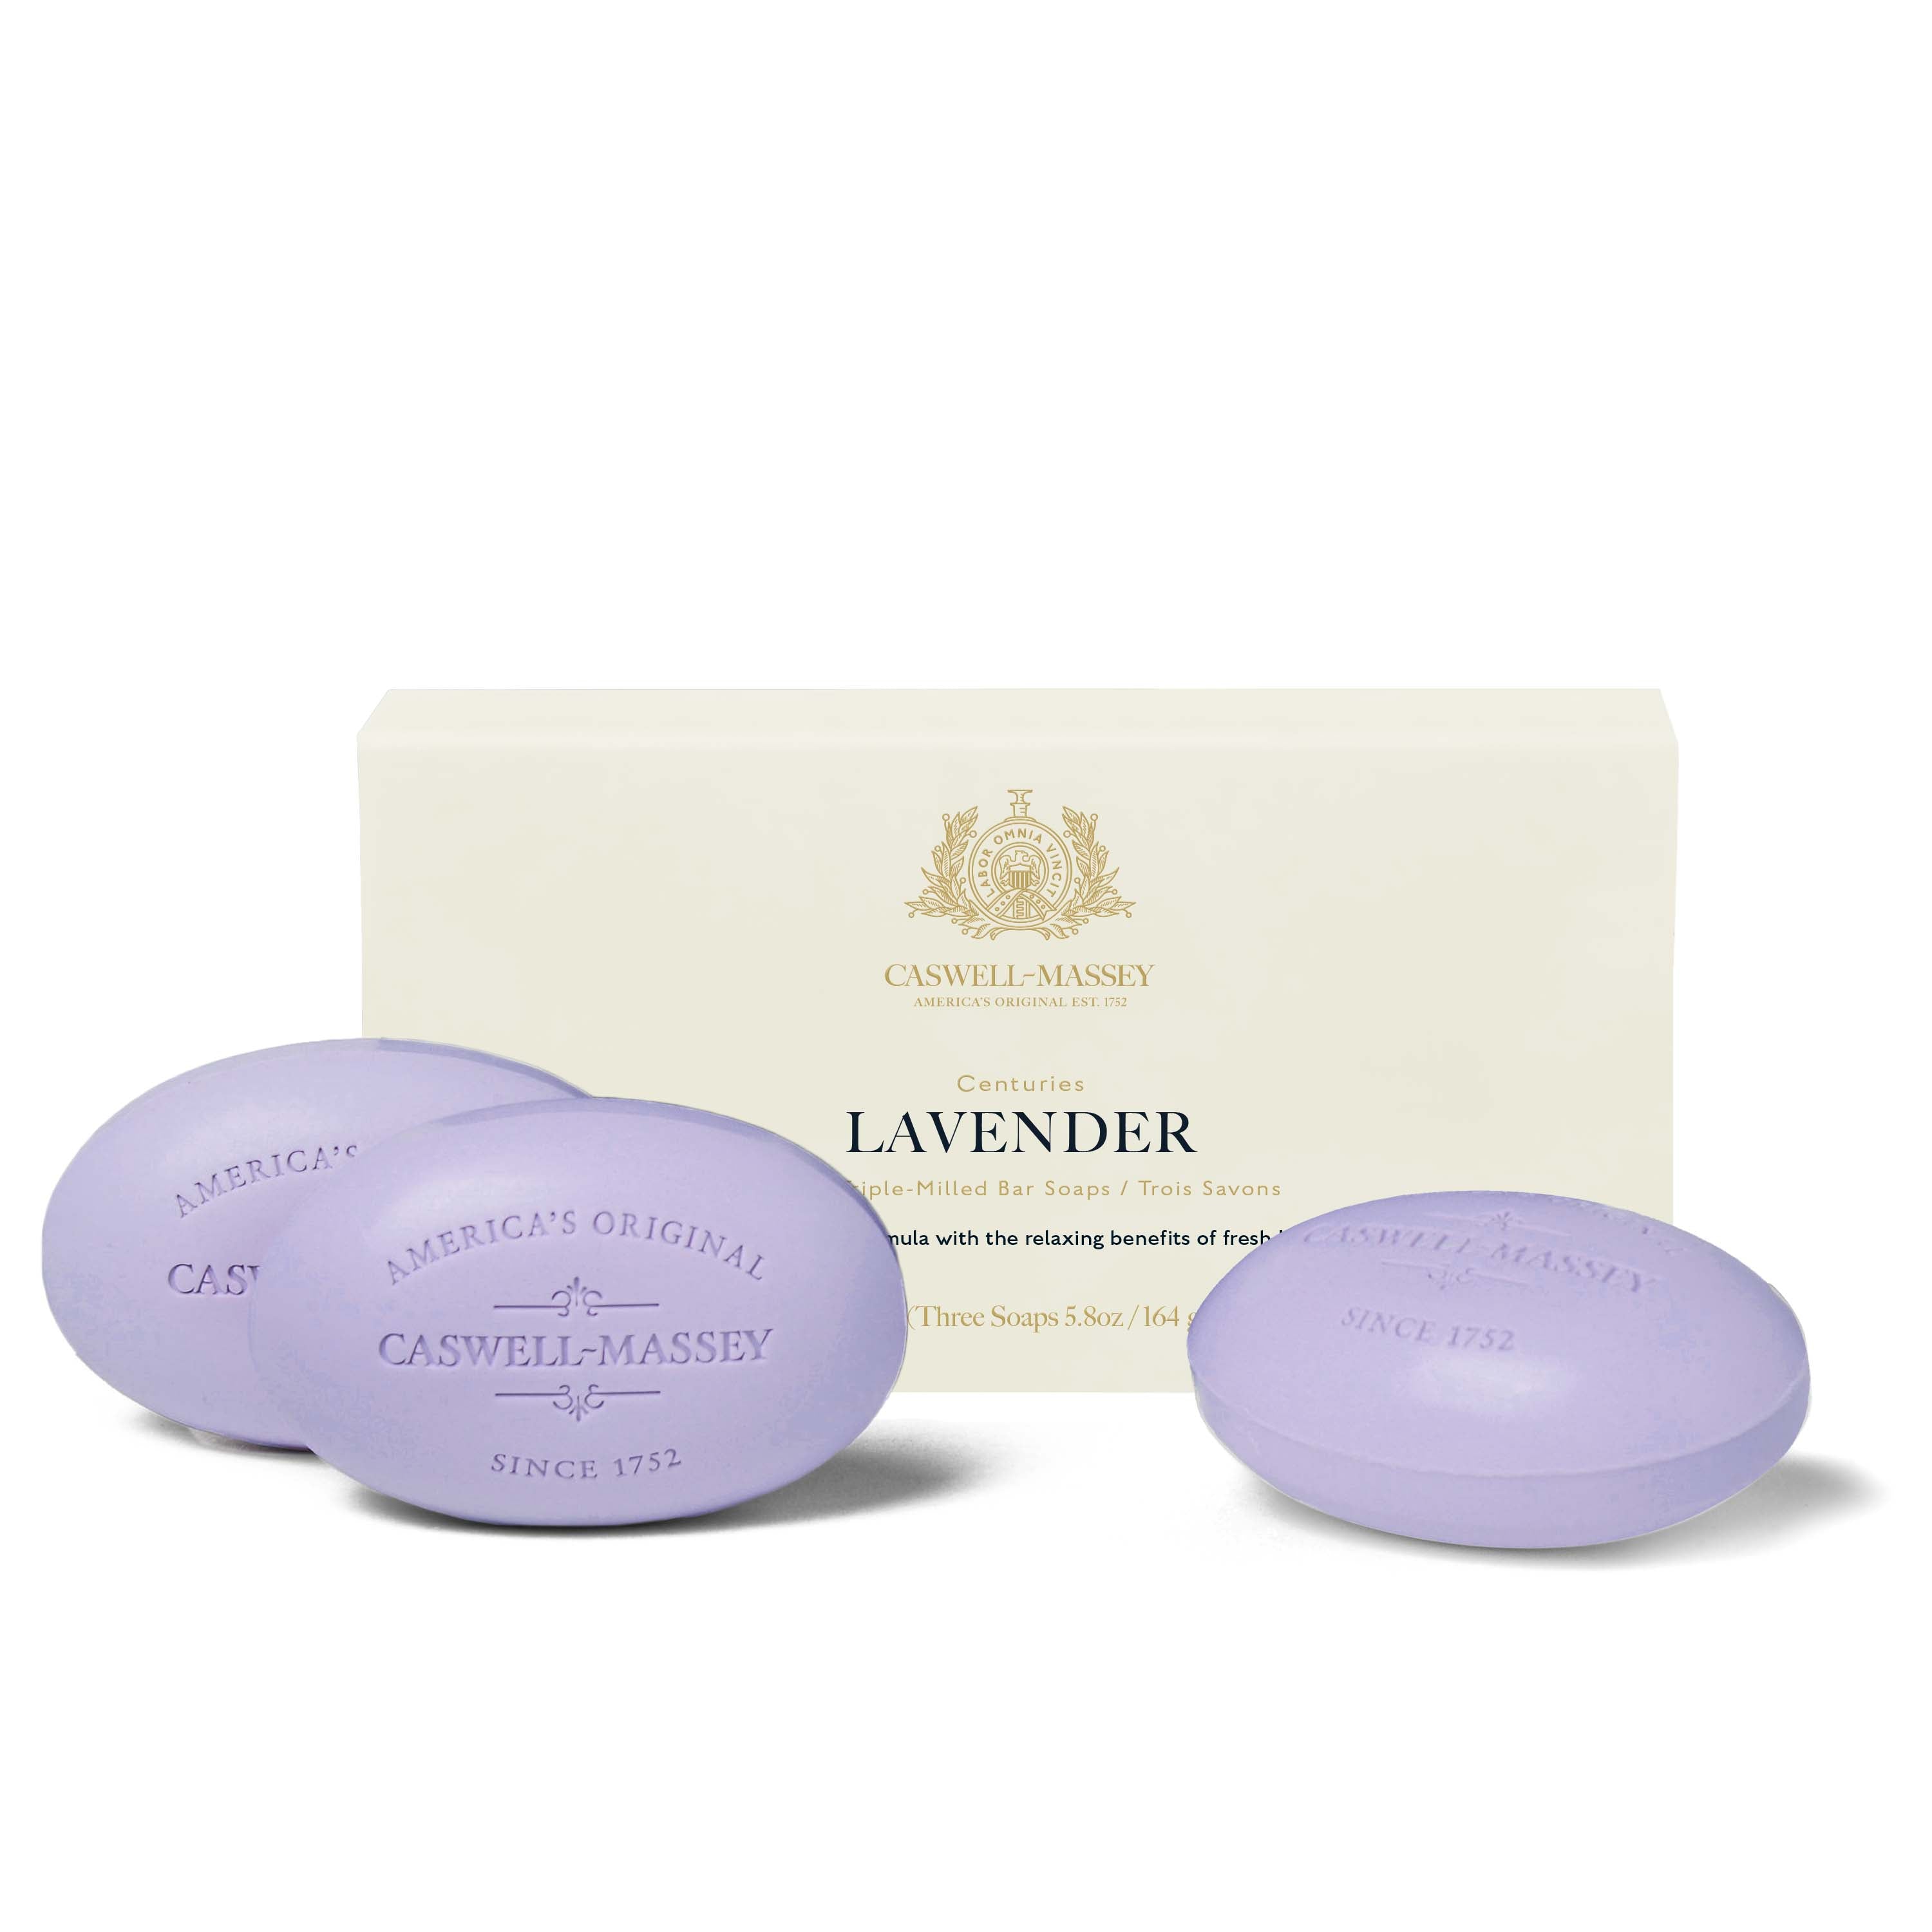 Caswell-Massey® Centuries Lavender 3-Soap Set shown with cream gift box alongside purple bars of soap